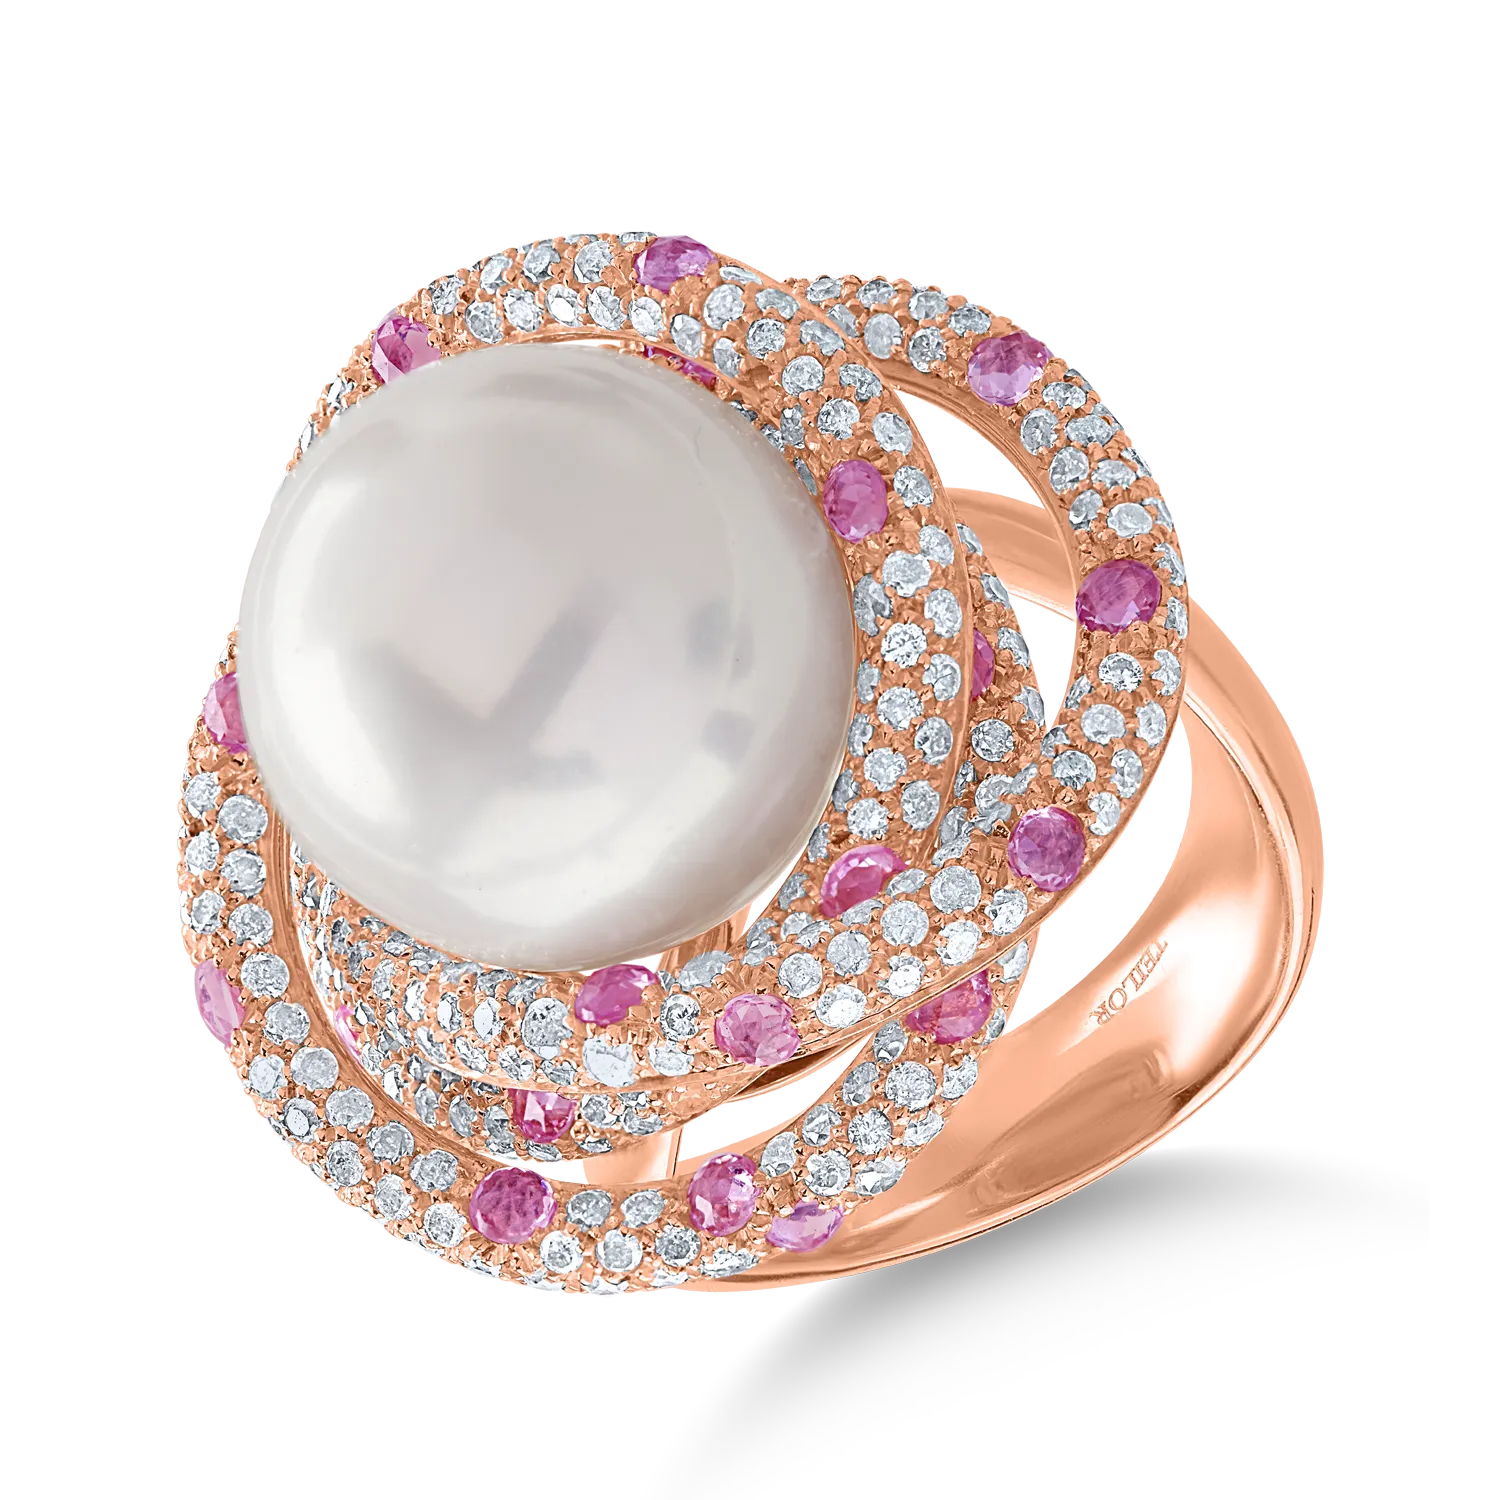 Rose gold ring with 23.3ct fresh water pearl and 3.15ct precious stones